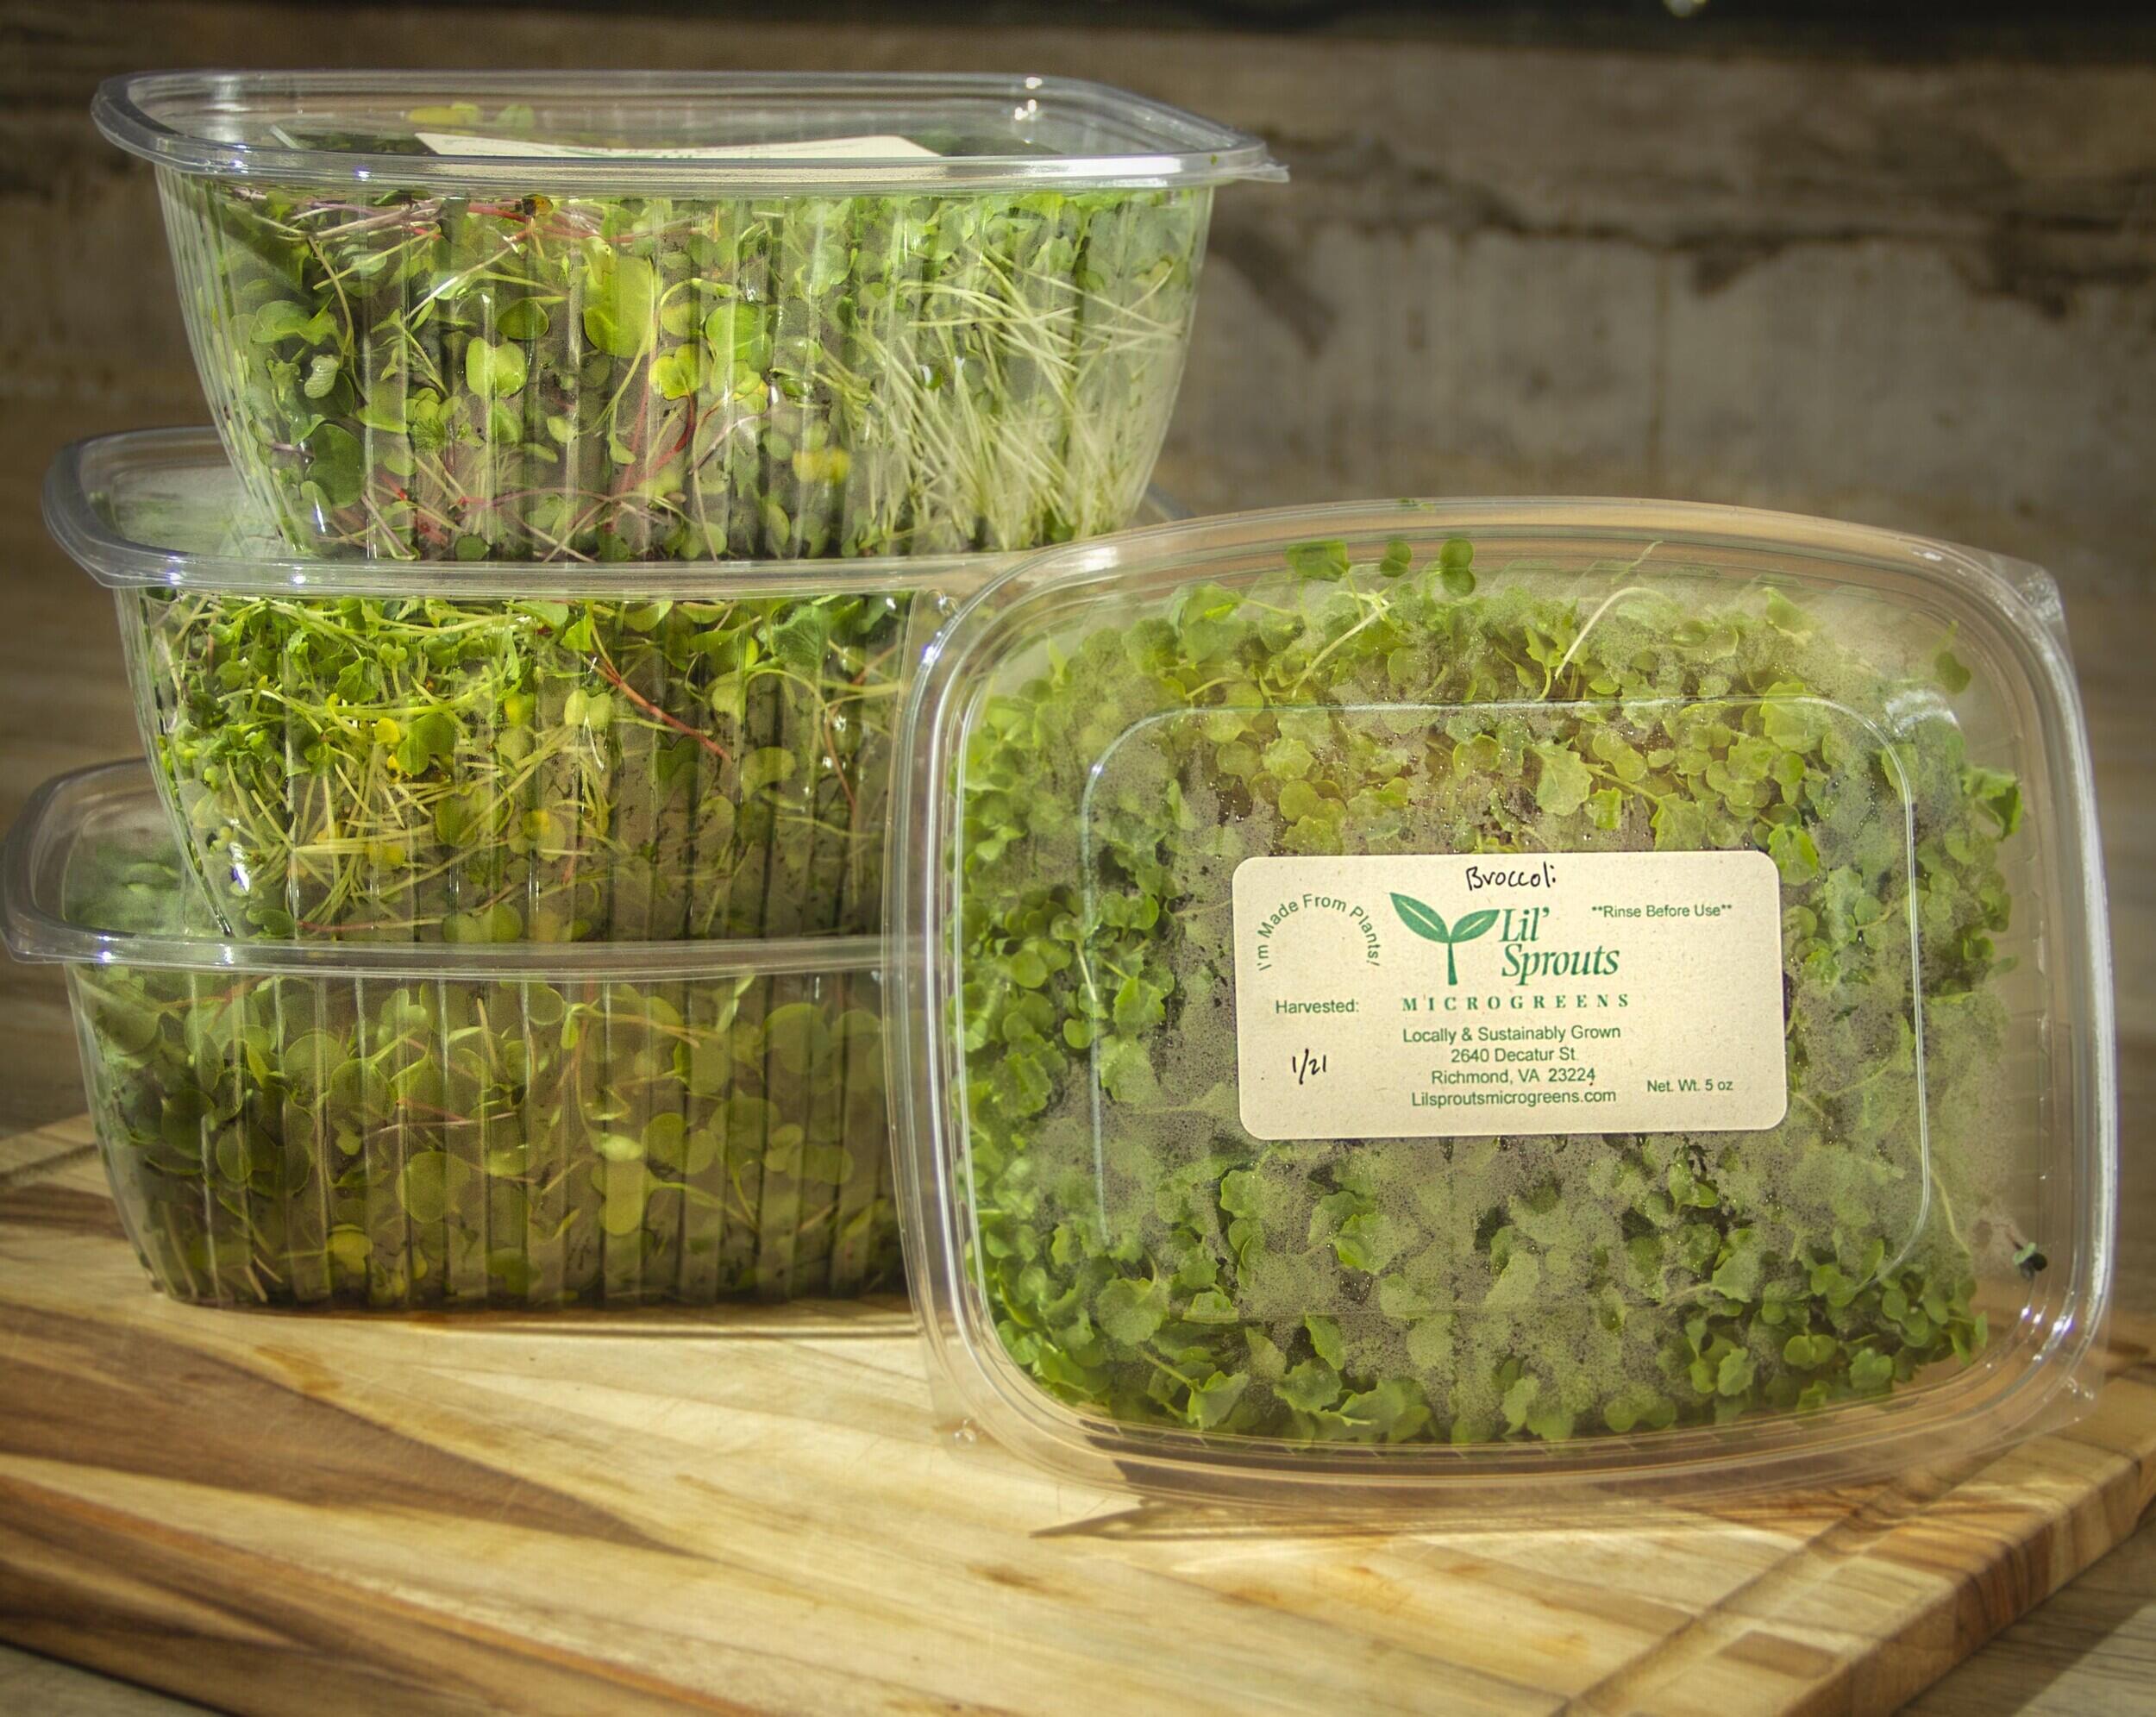 Packages of microgreen products.